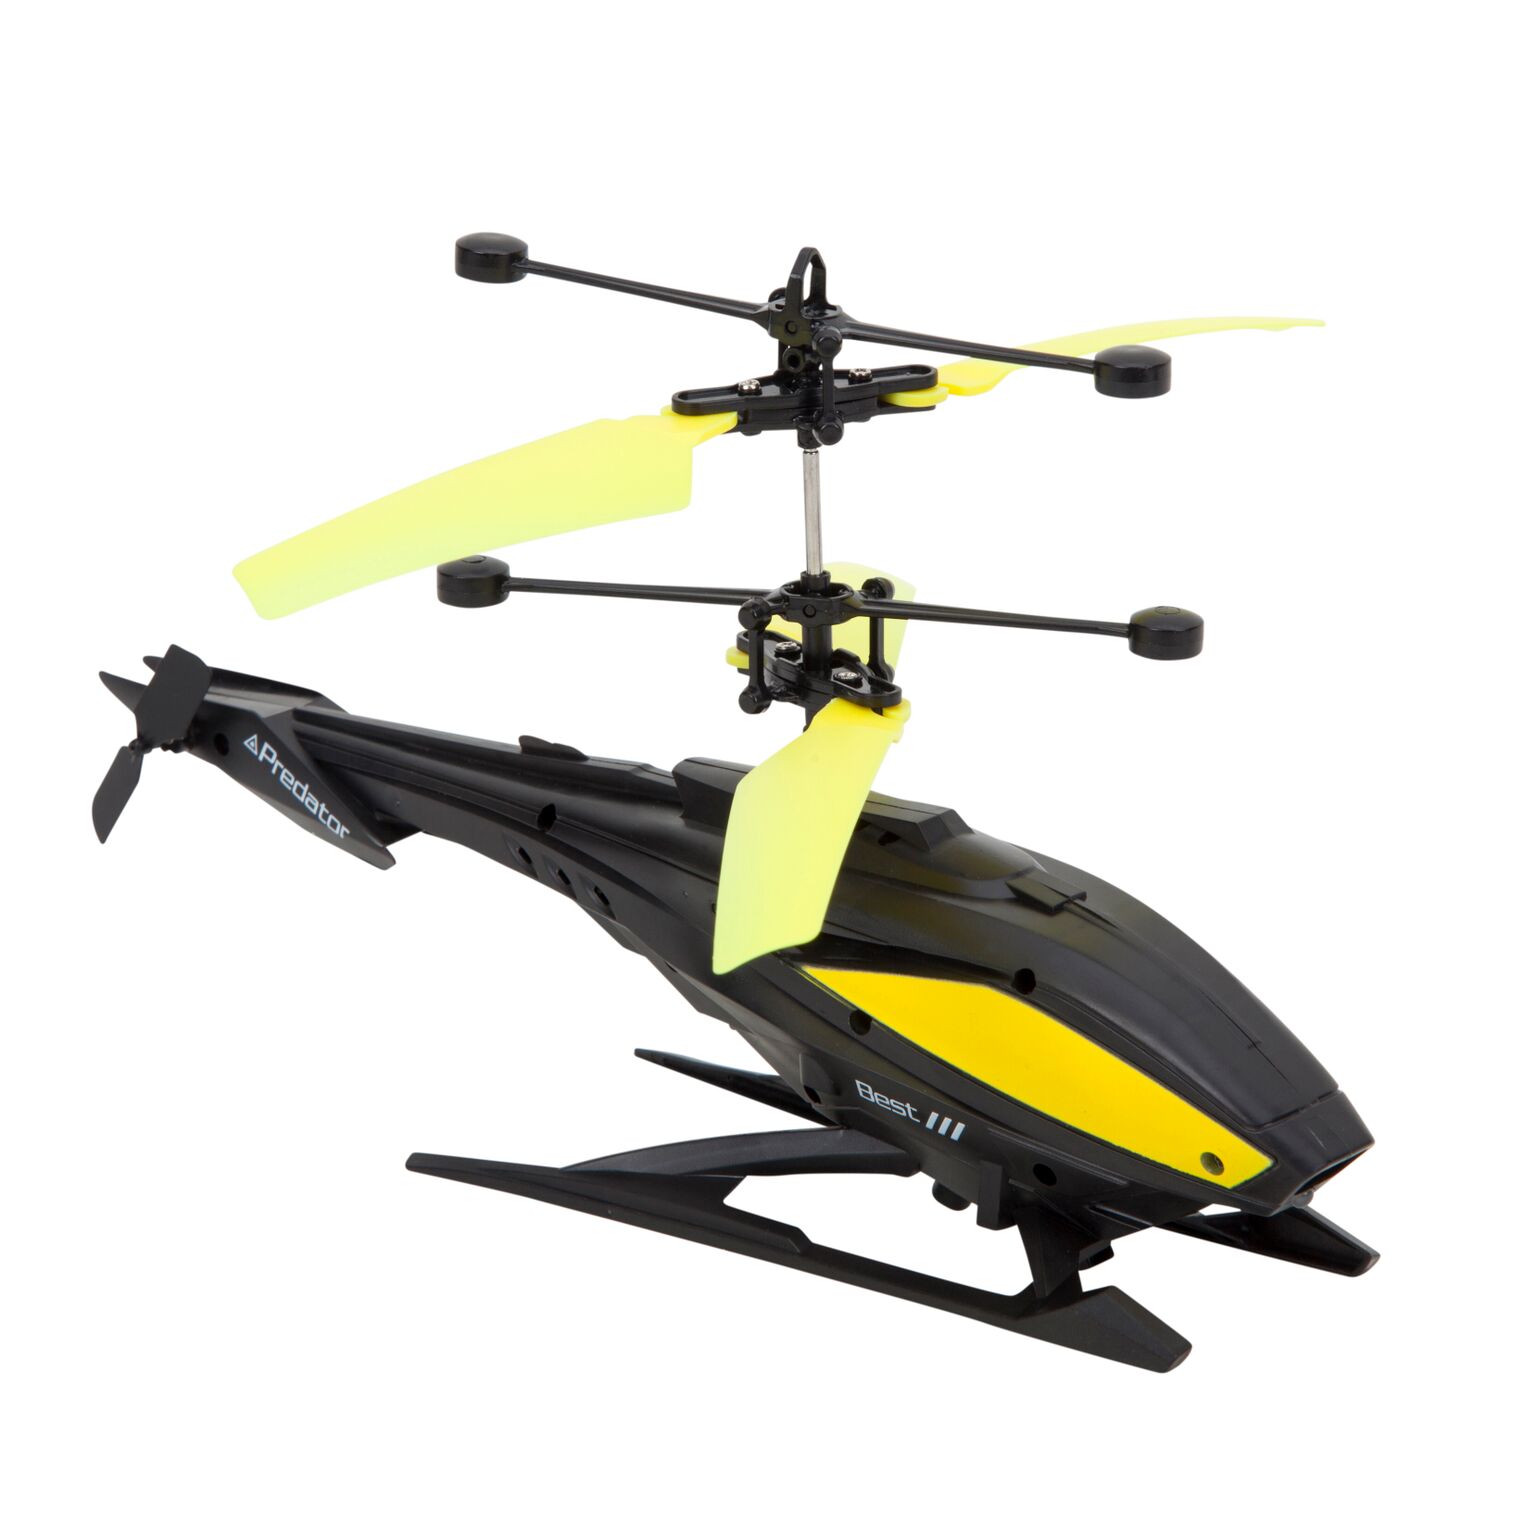 Induction Flying Toys RC Helicopter Cartoon Remote Control Drone Kids Plane UK 